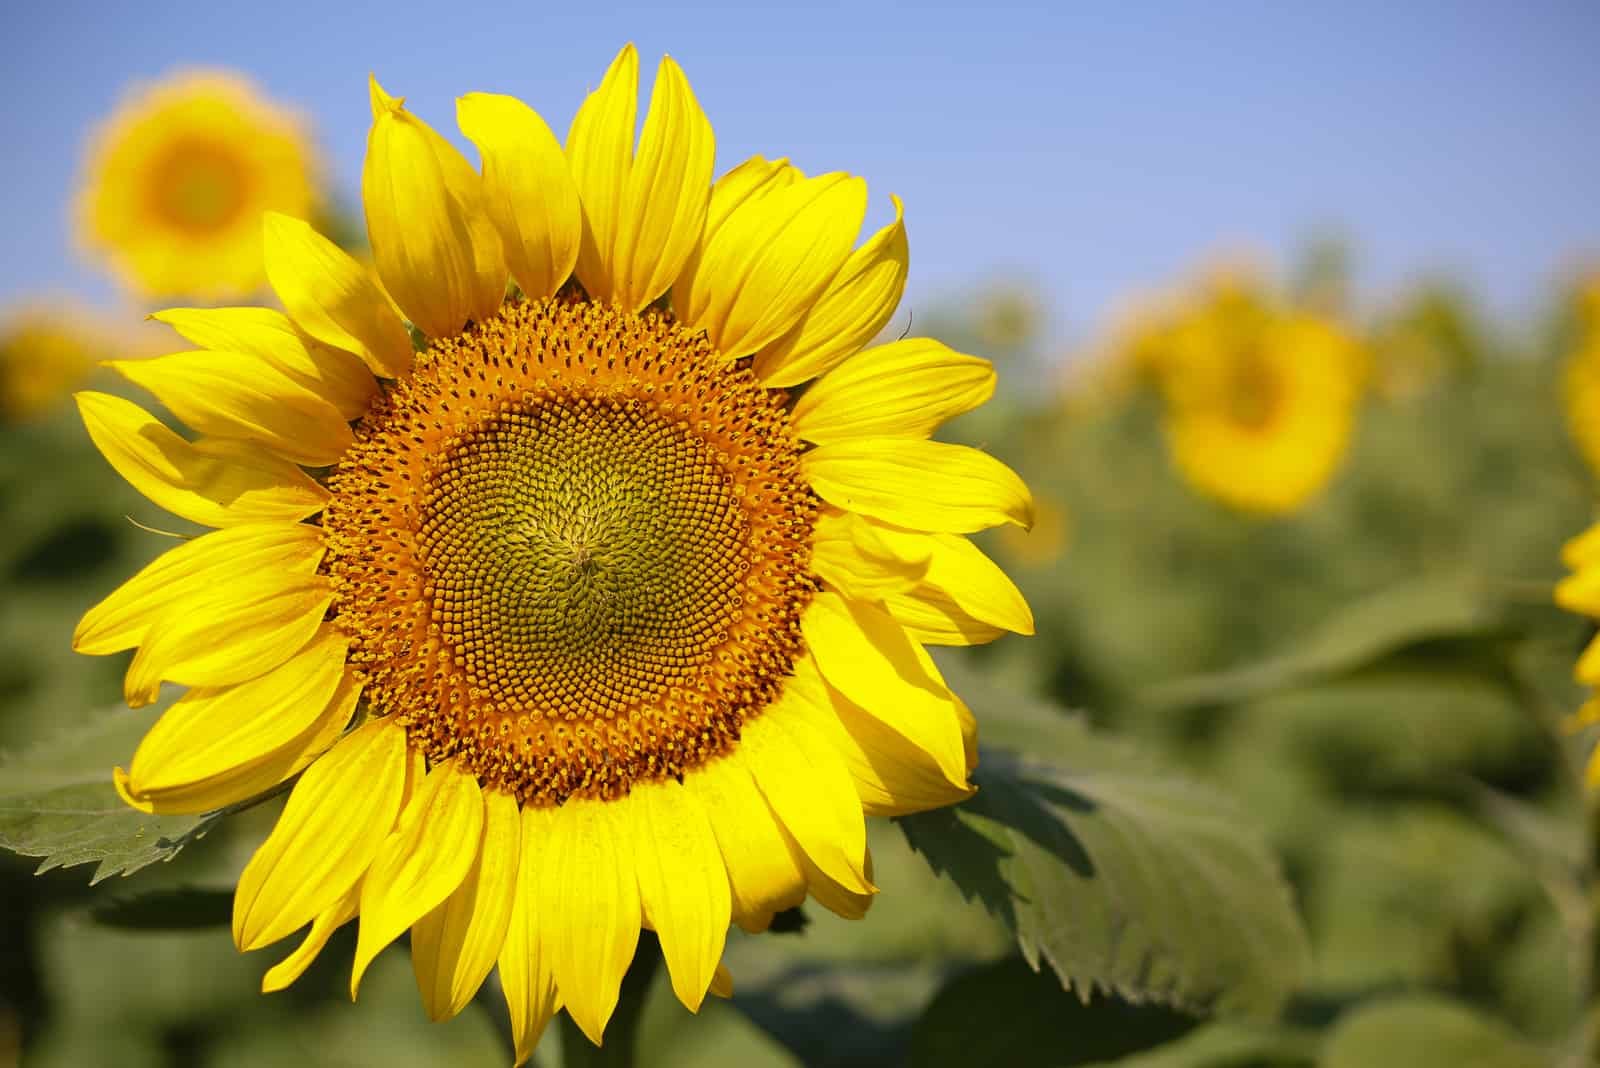 A List Of Sunflower Companion Plants: From Best To Worst